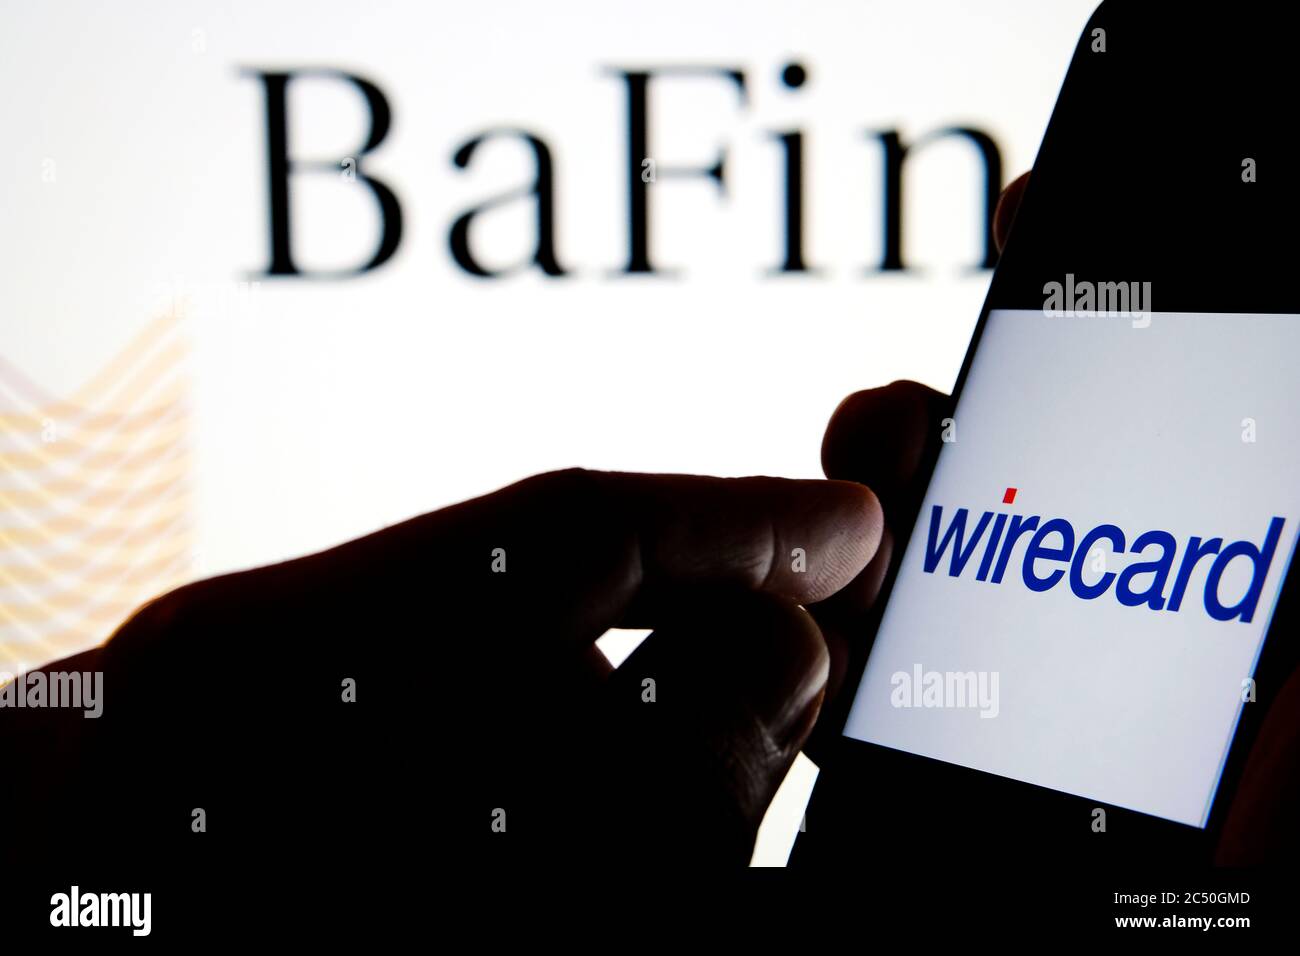 Wirecard logo on smartphone and BaFin (Federal Financial Supervisory Authority) logo on the blurred background screen. Stock Photo